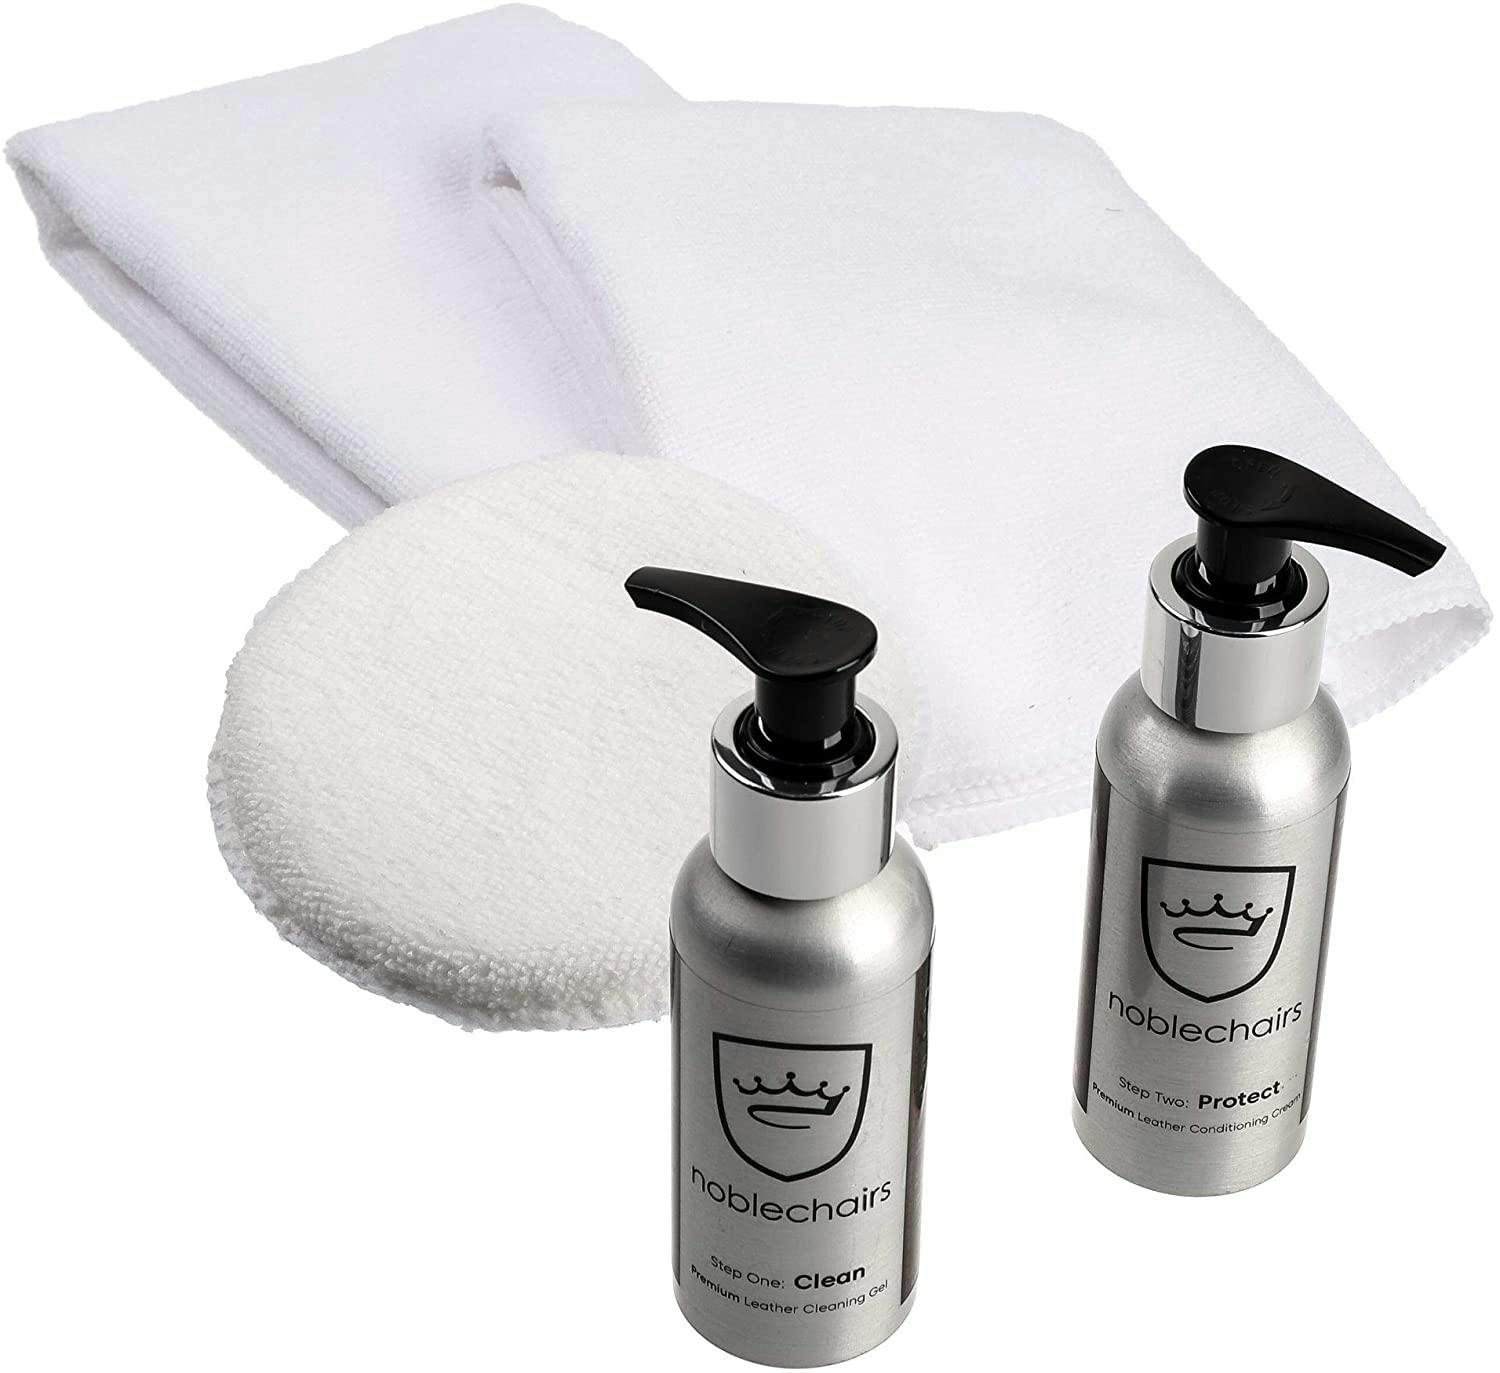 Noblechairs - Premium Cleaning and Care Kit